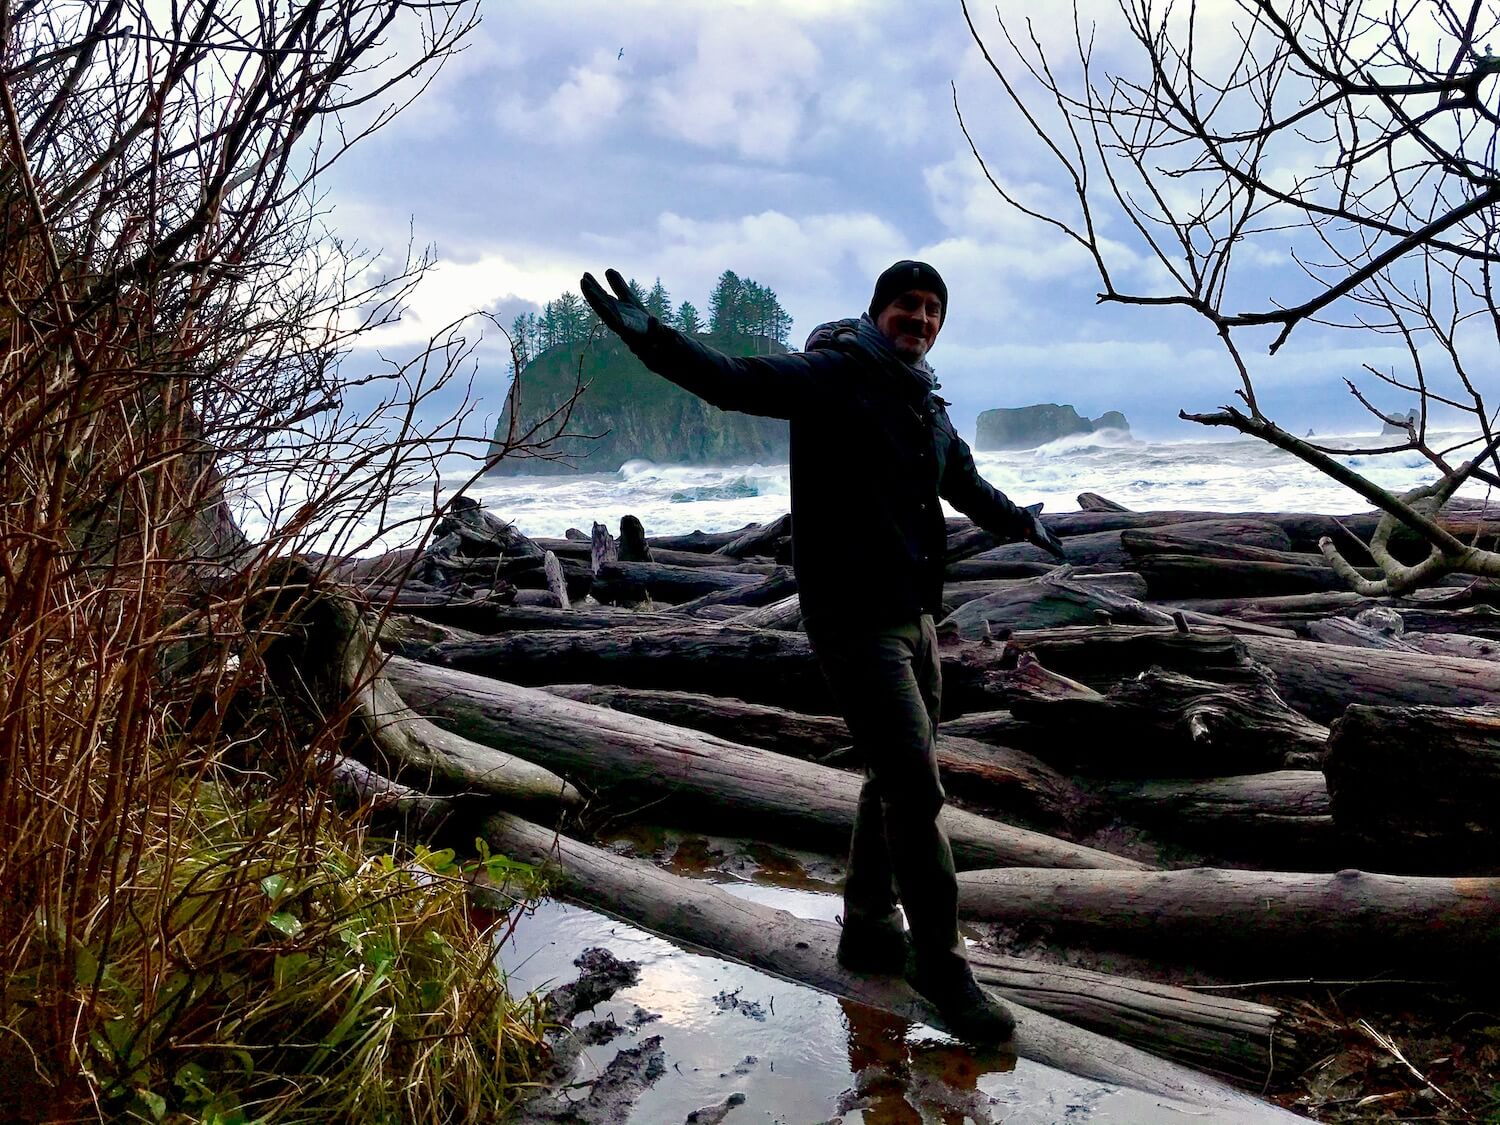 A man is walking on a log while exploring Second Beach in the Olympic National Park. The coastal waves are rough, crashing up against a barricade of wild logs, with a rocky island popping up in the background under a mix of clouds and blue sky.